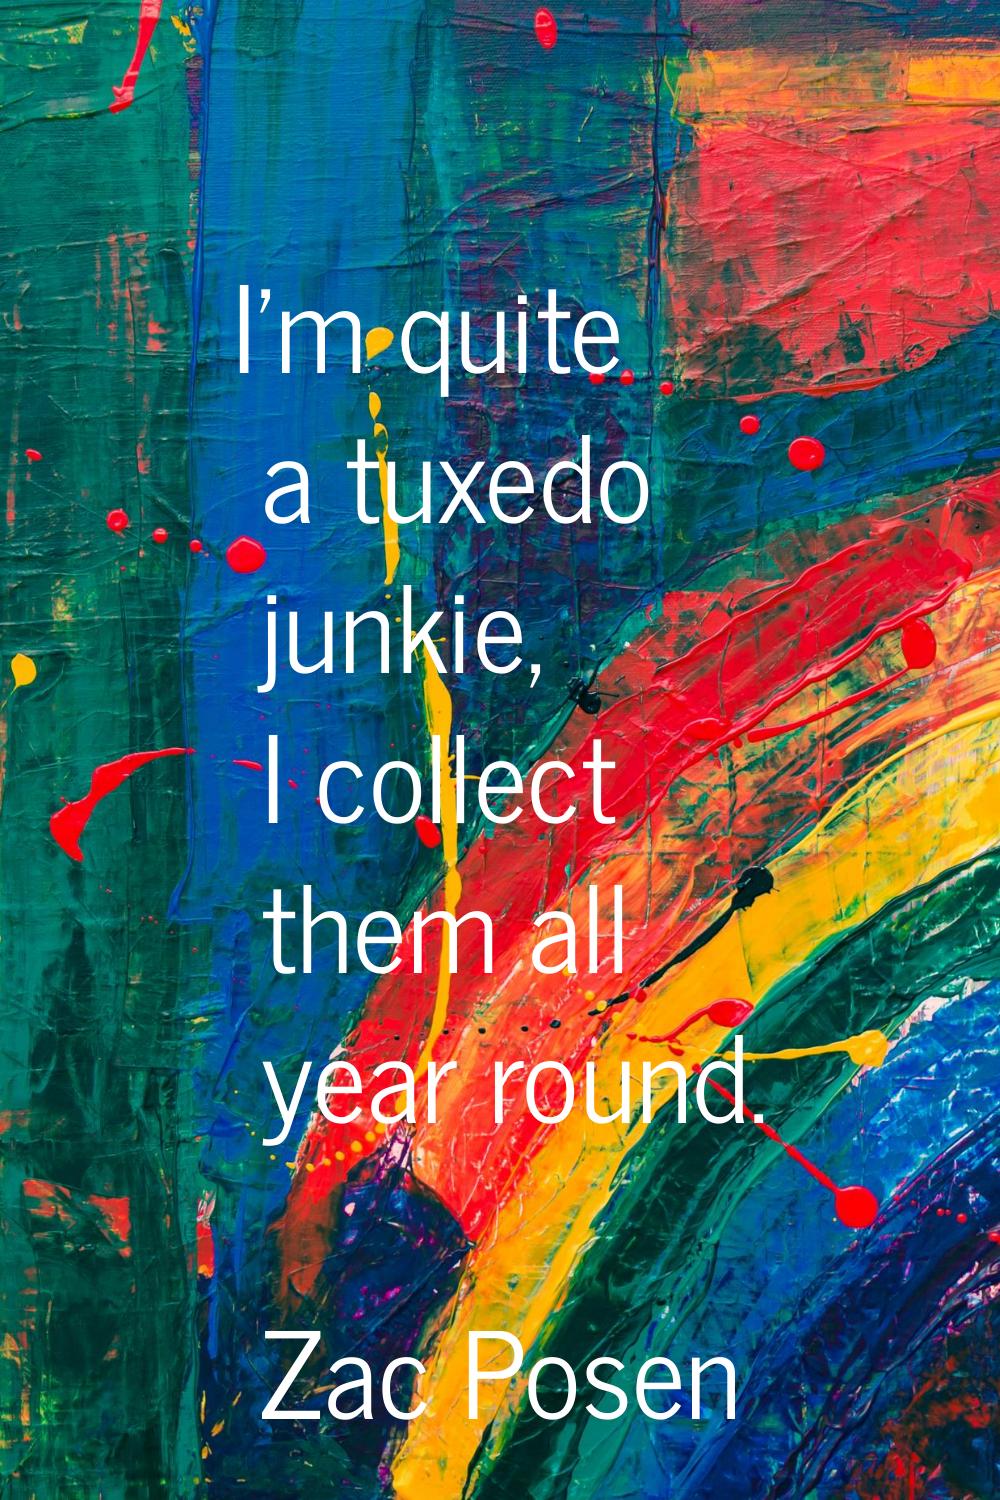 I'm quite a tuxedo junkie, I collect them all year round.